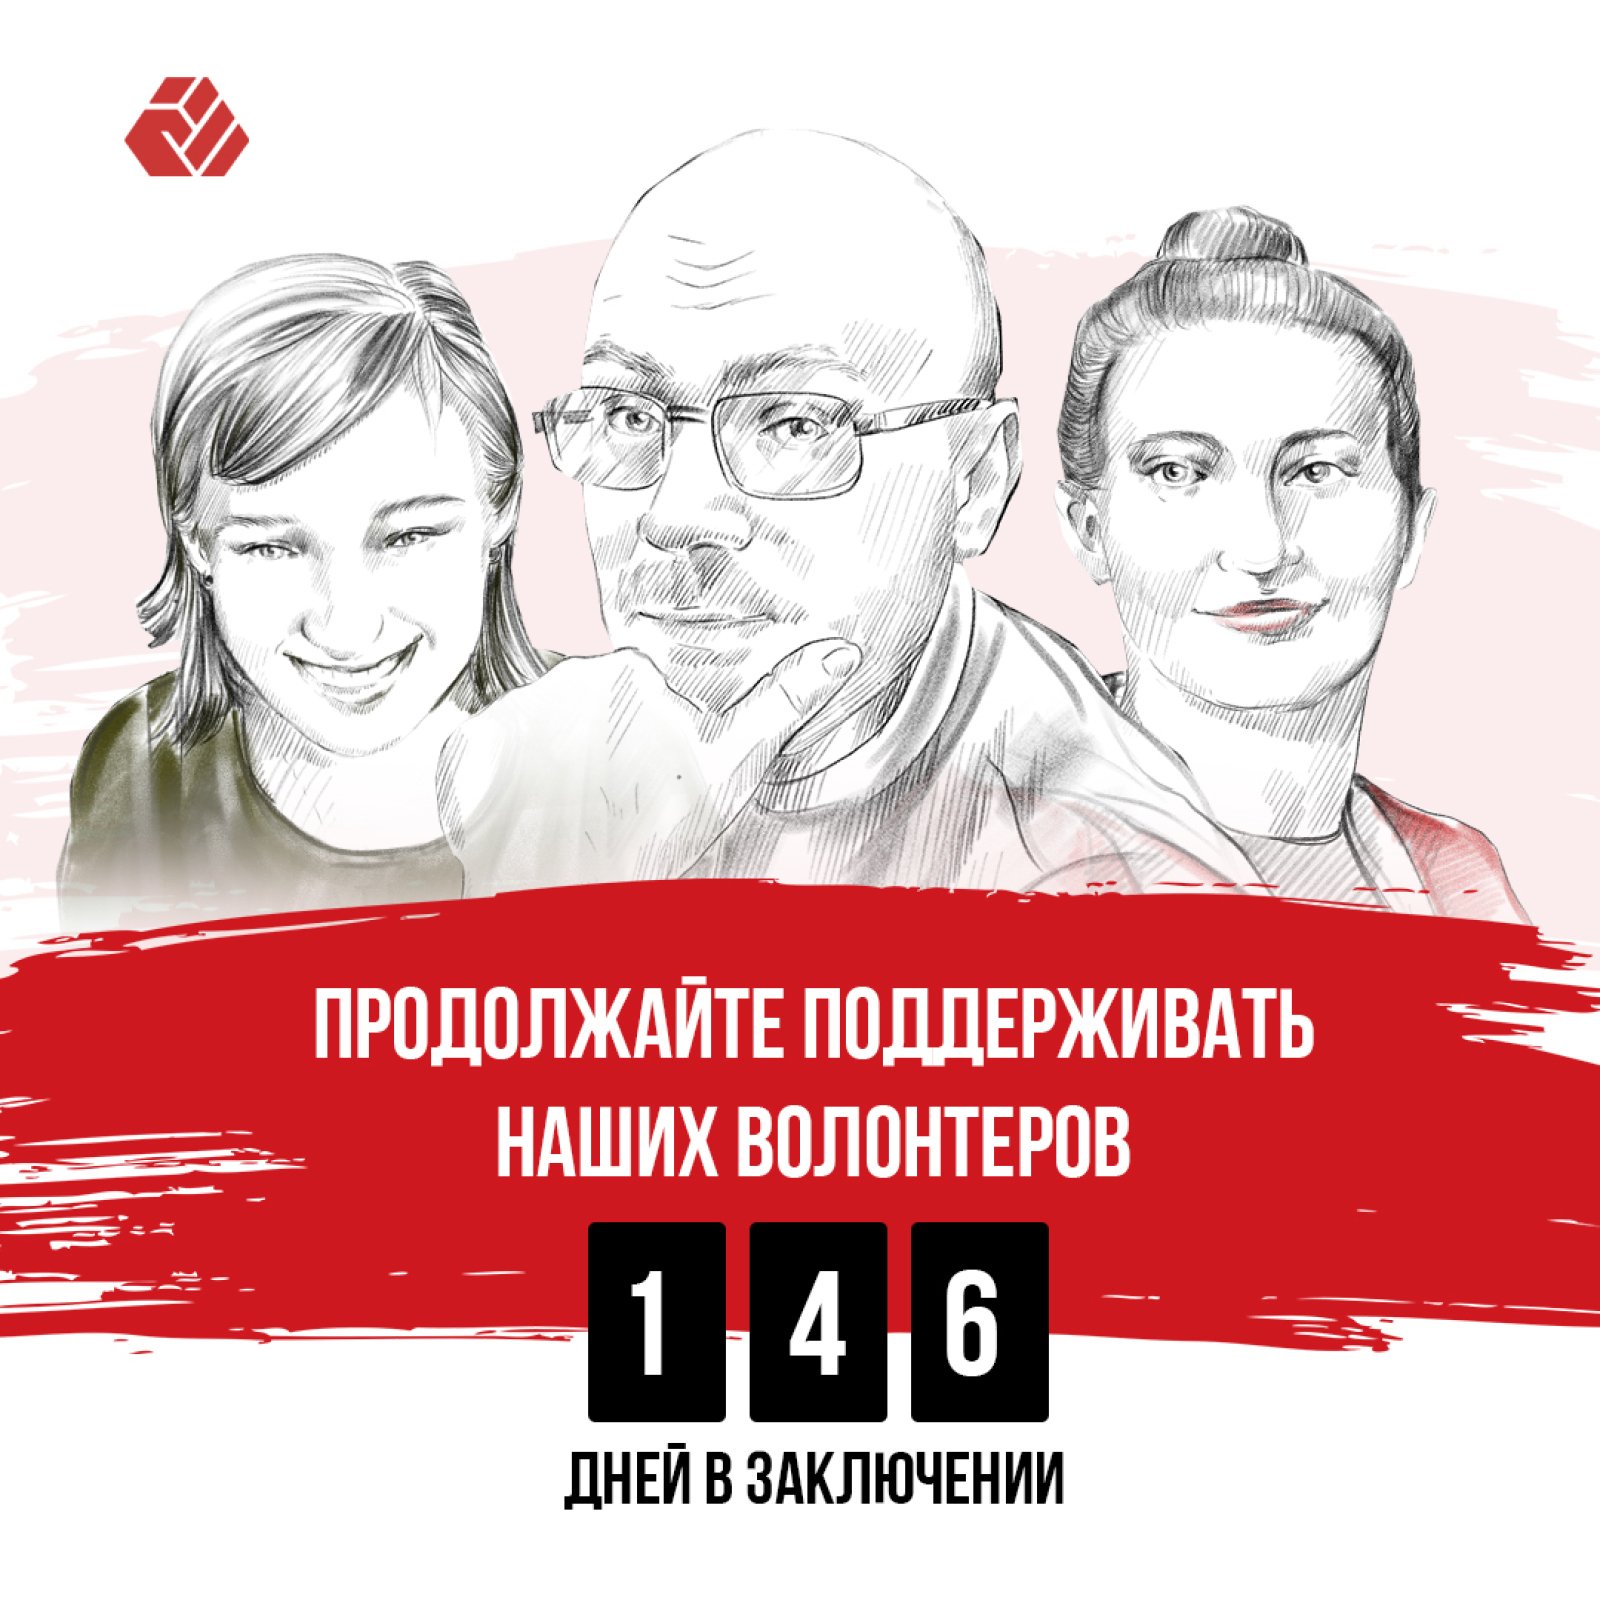 The volunteers of "A Country to Live in" foundation are in captivity of the dictator